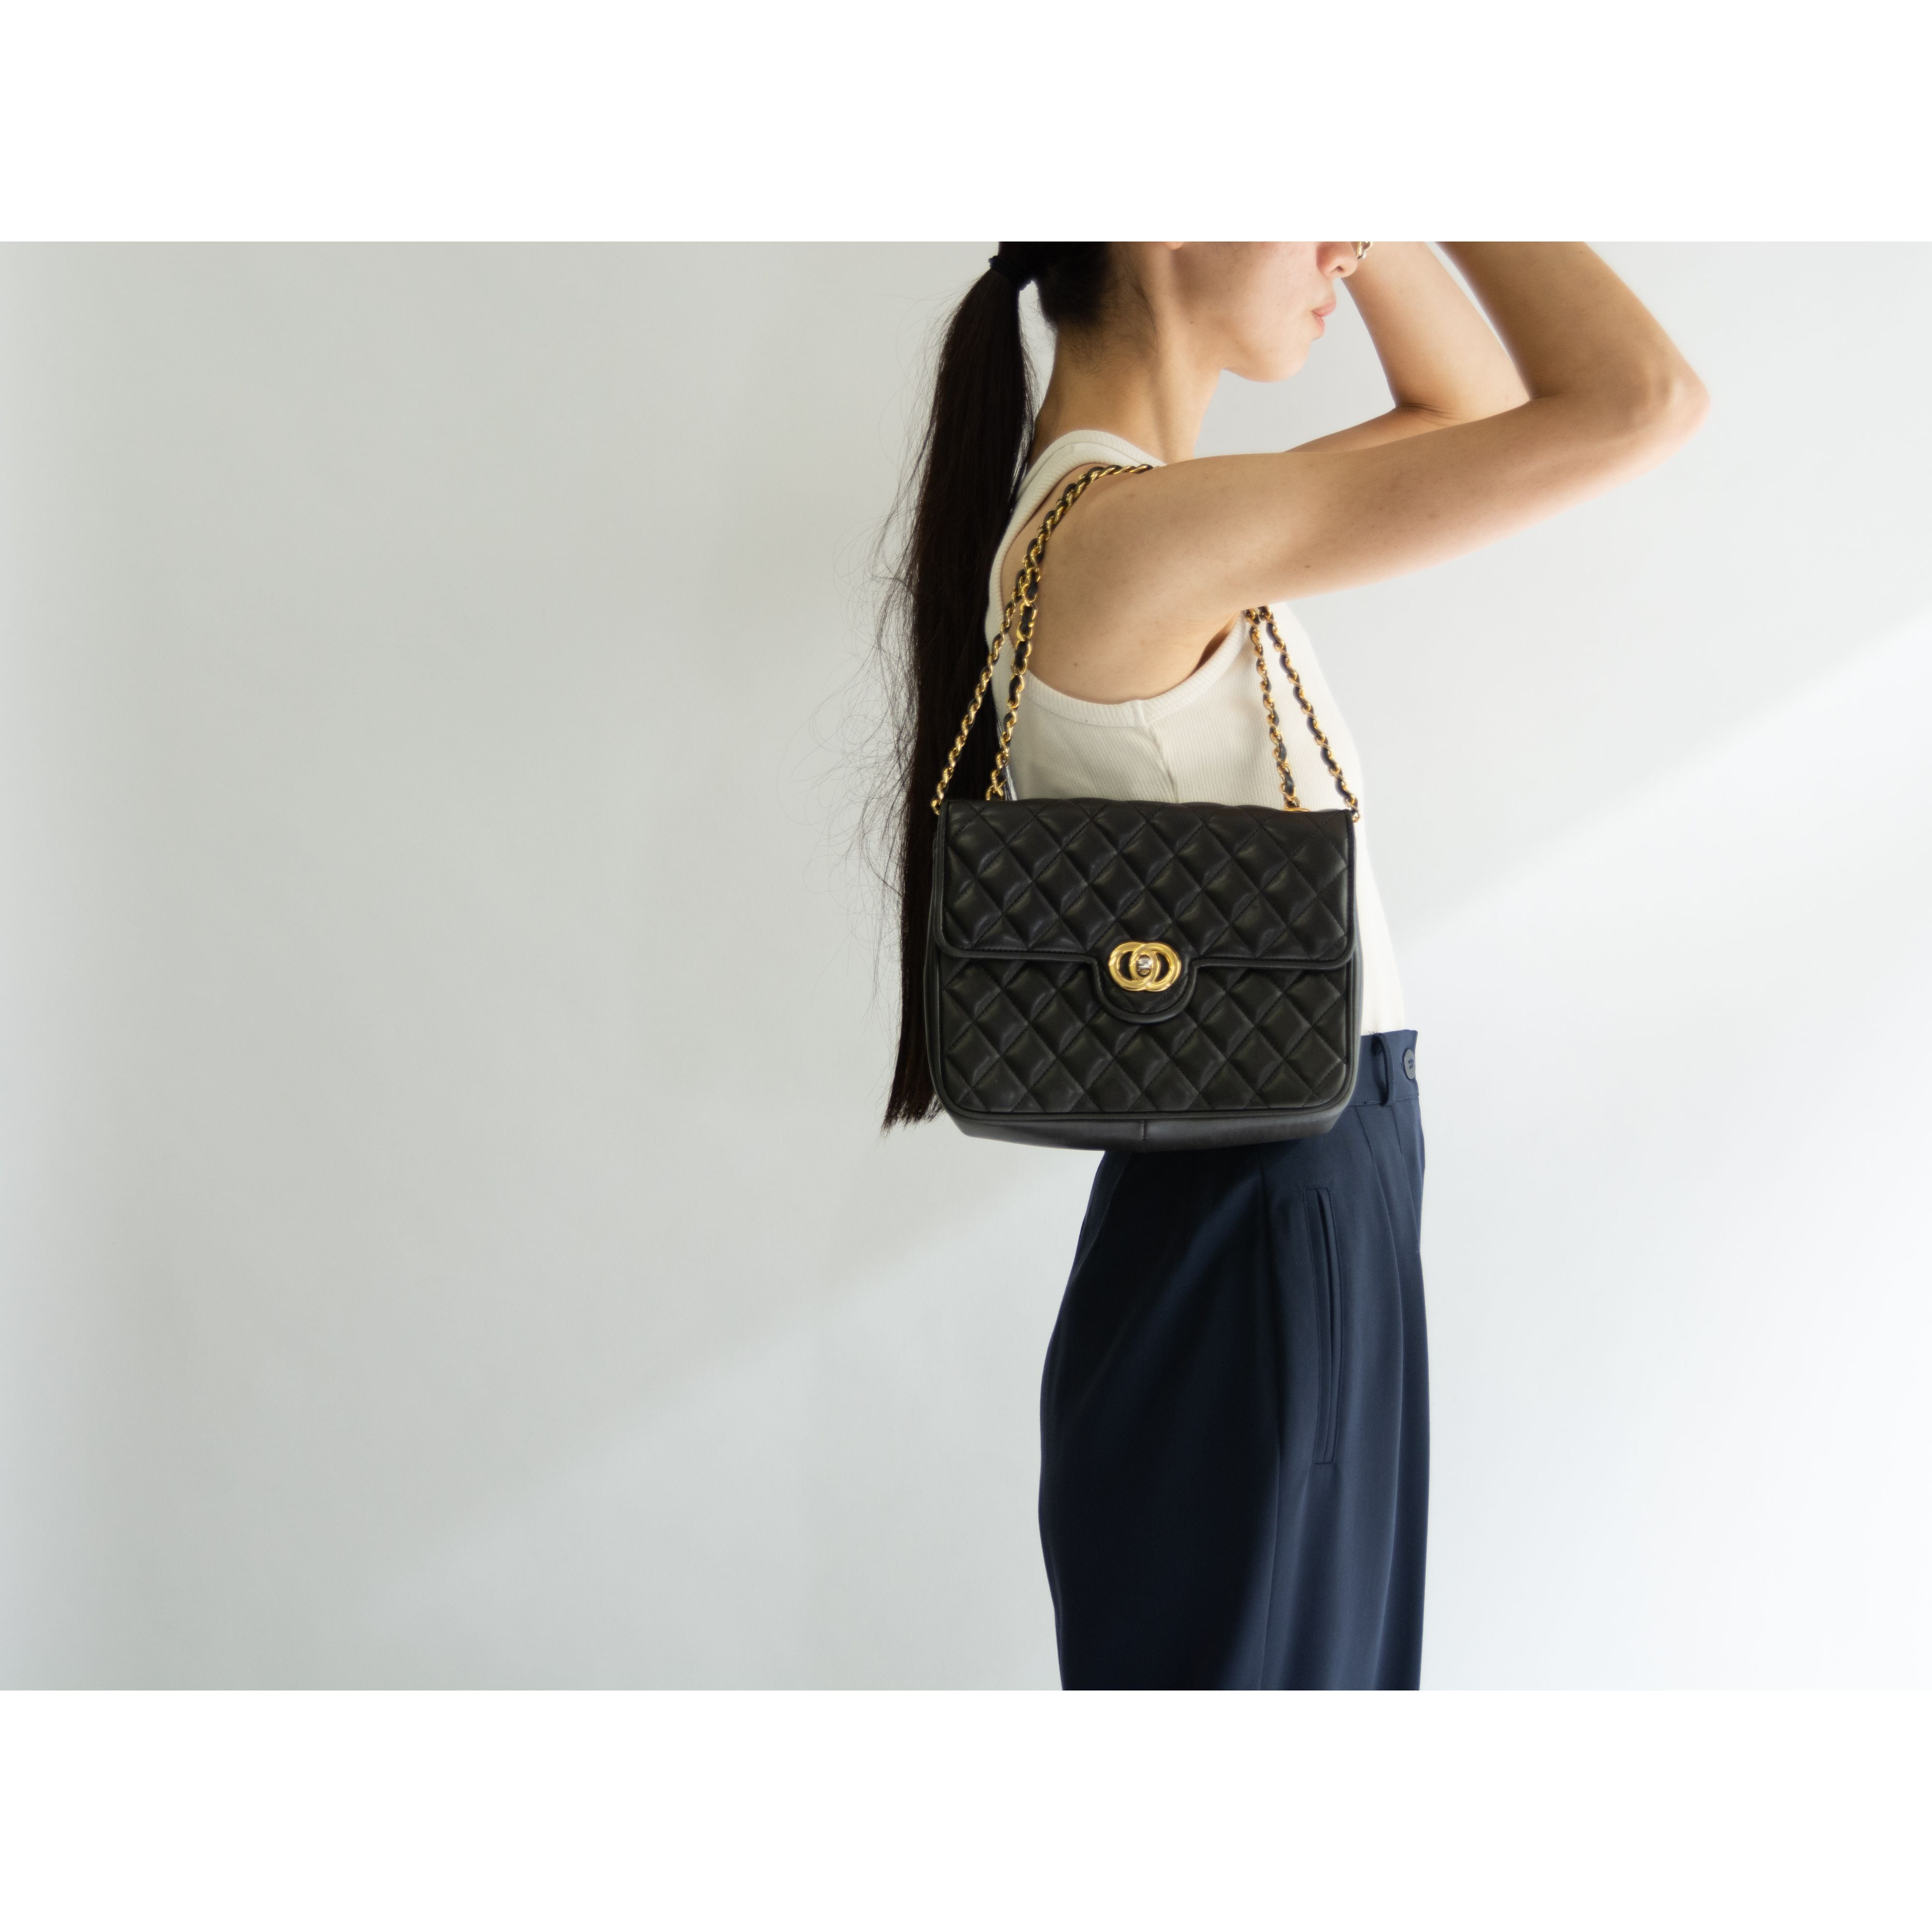 【DOPPIO CC】Made in Italy Leather Chain Shoulder Bag（イタリア製 レザーチェーンショルダーバッグ）